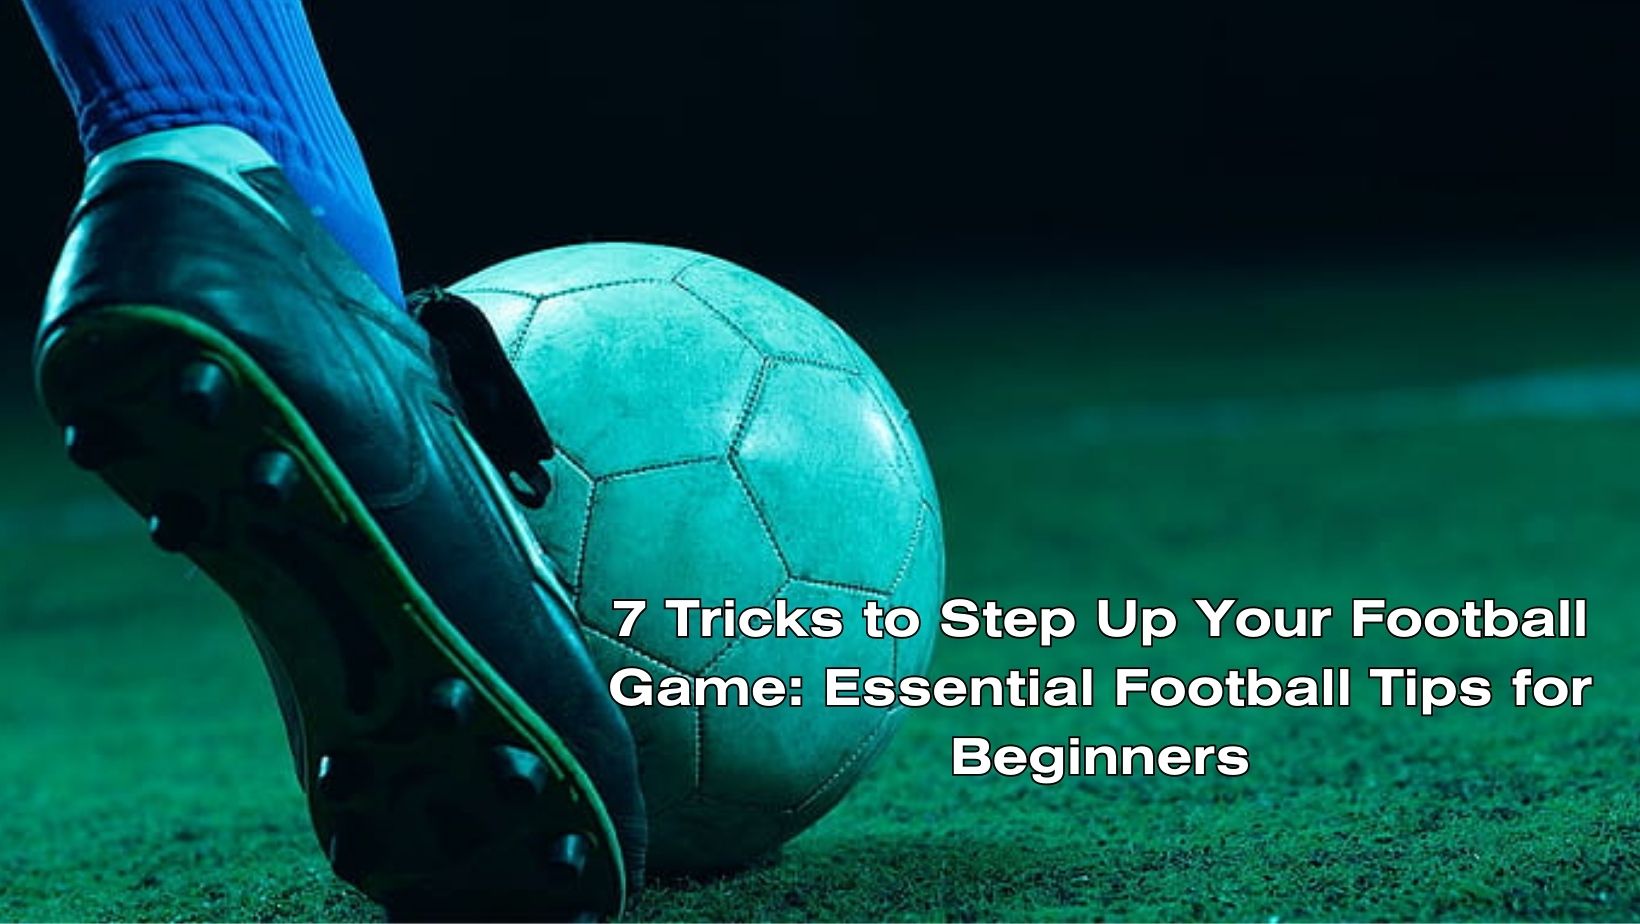 7 Tricks to Step Up Your Football Game: Essential Football Tips for Beginners